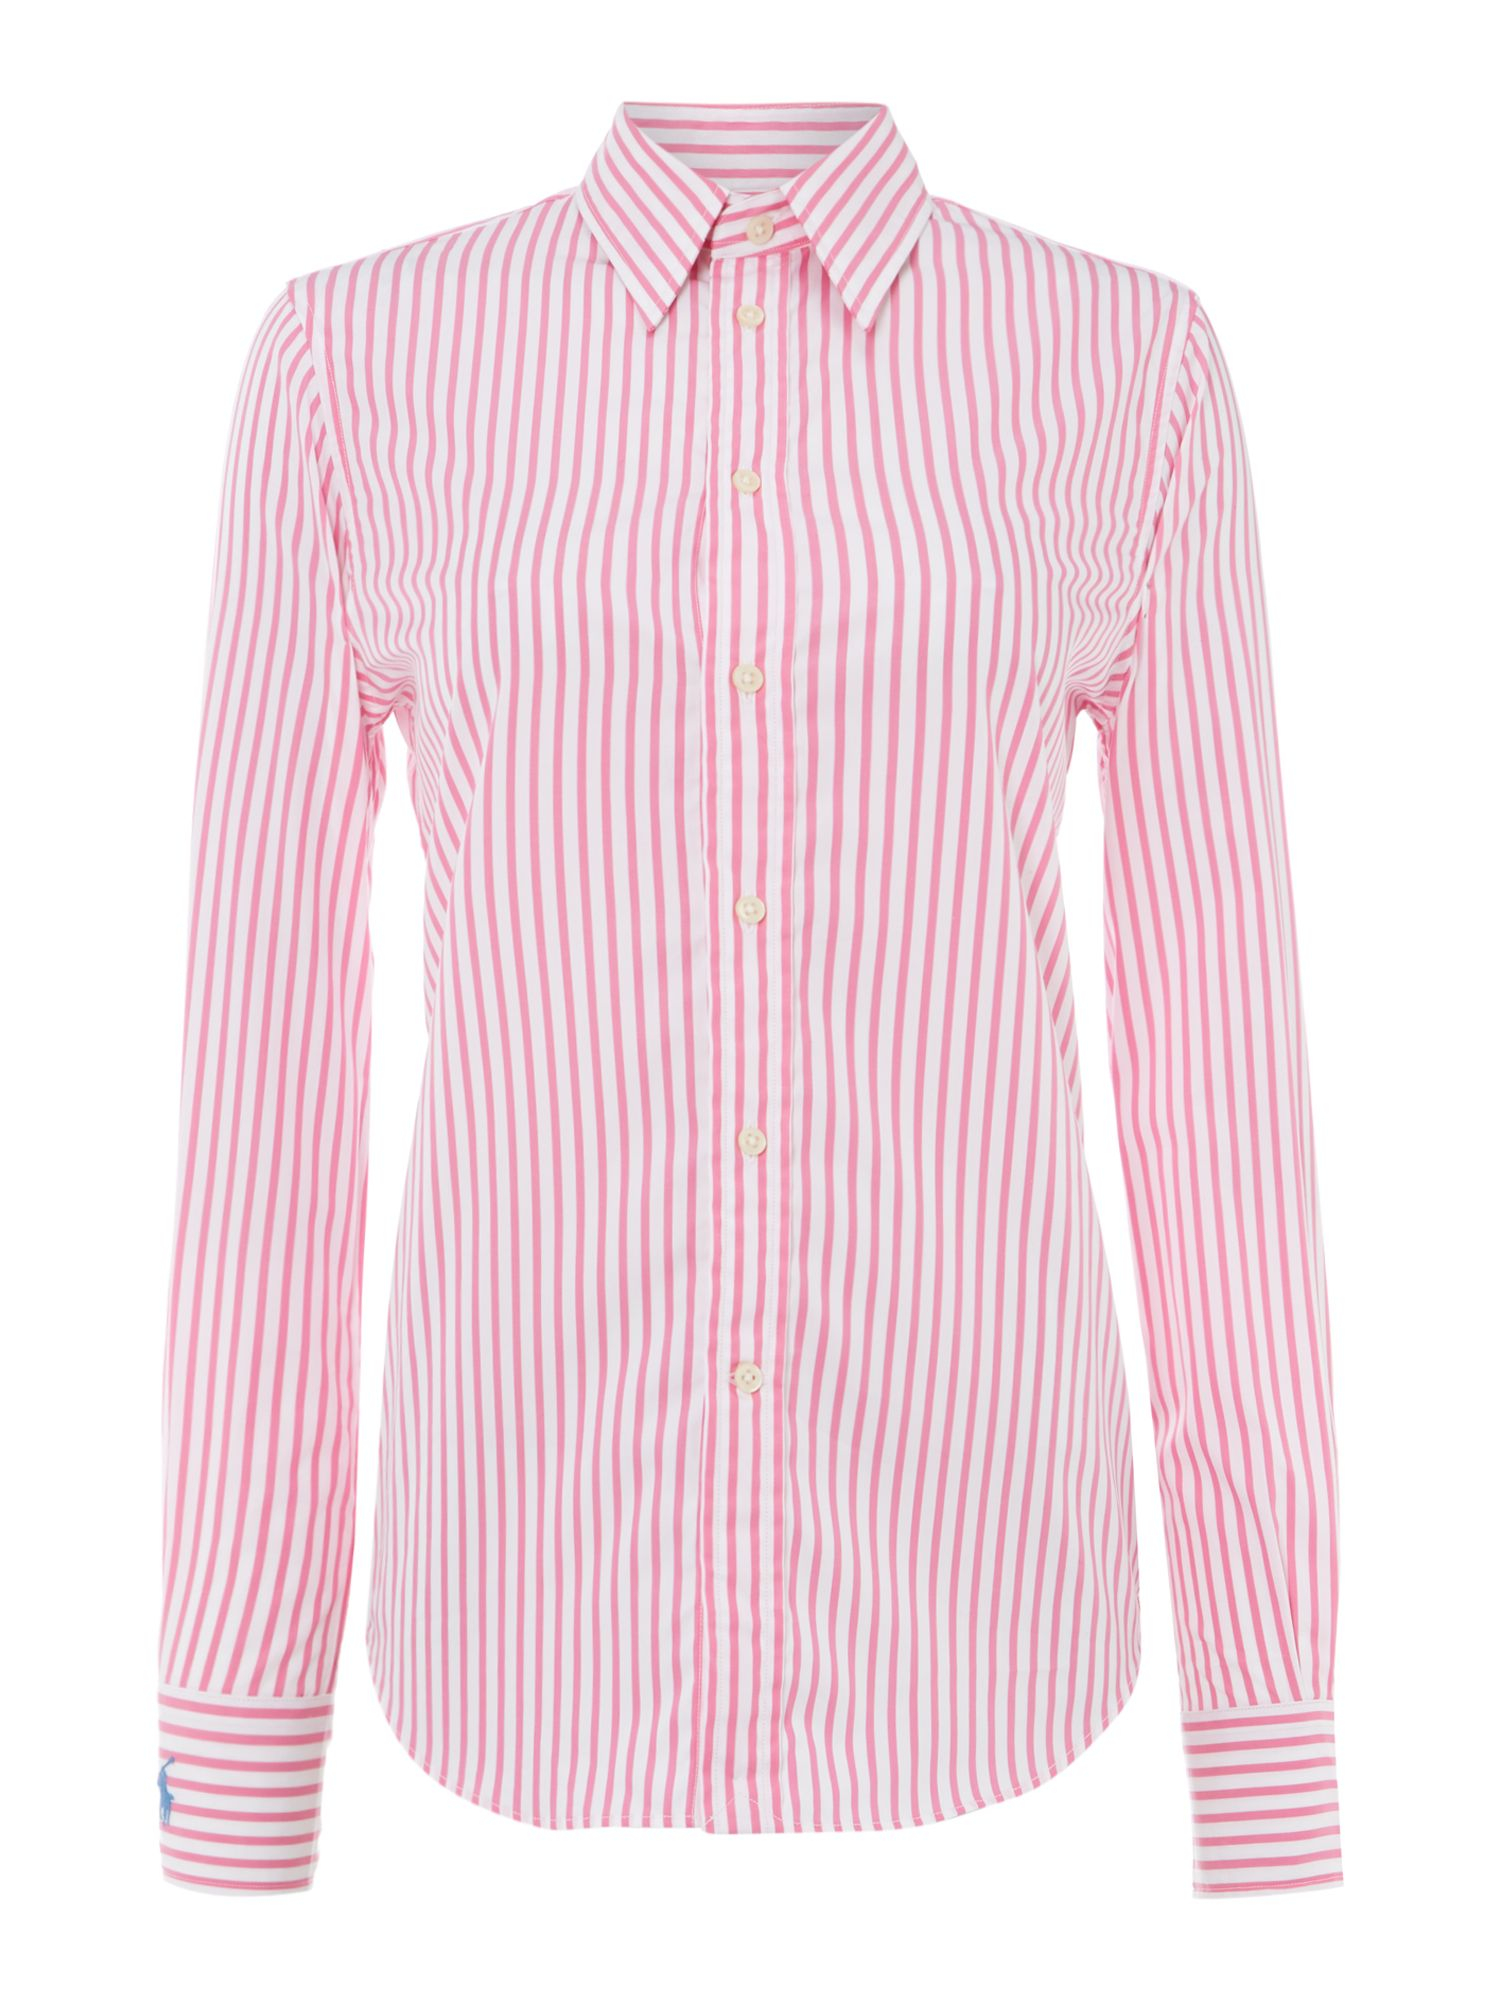 Lyst - Polo Ralph Lauren Long Sleeved Striped Shirt in Pink